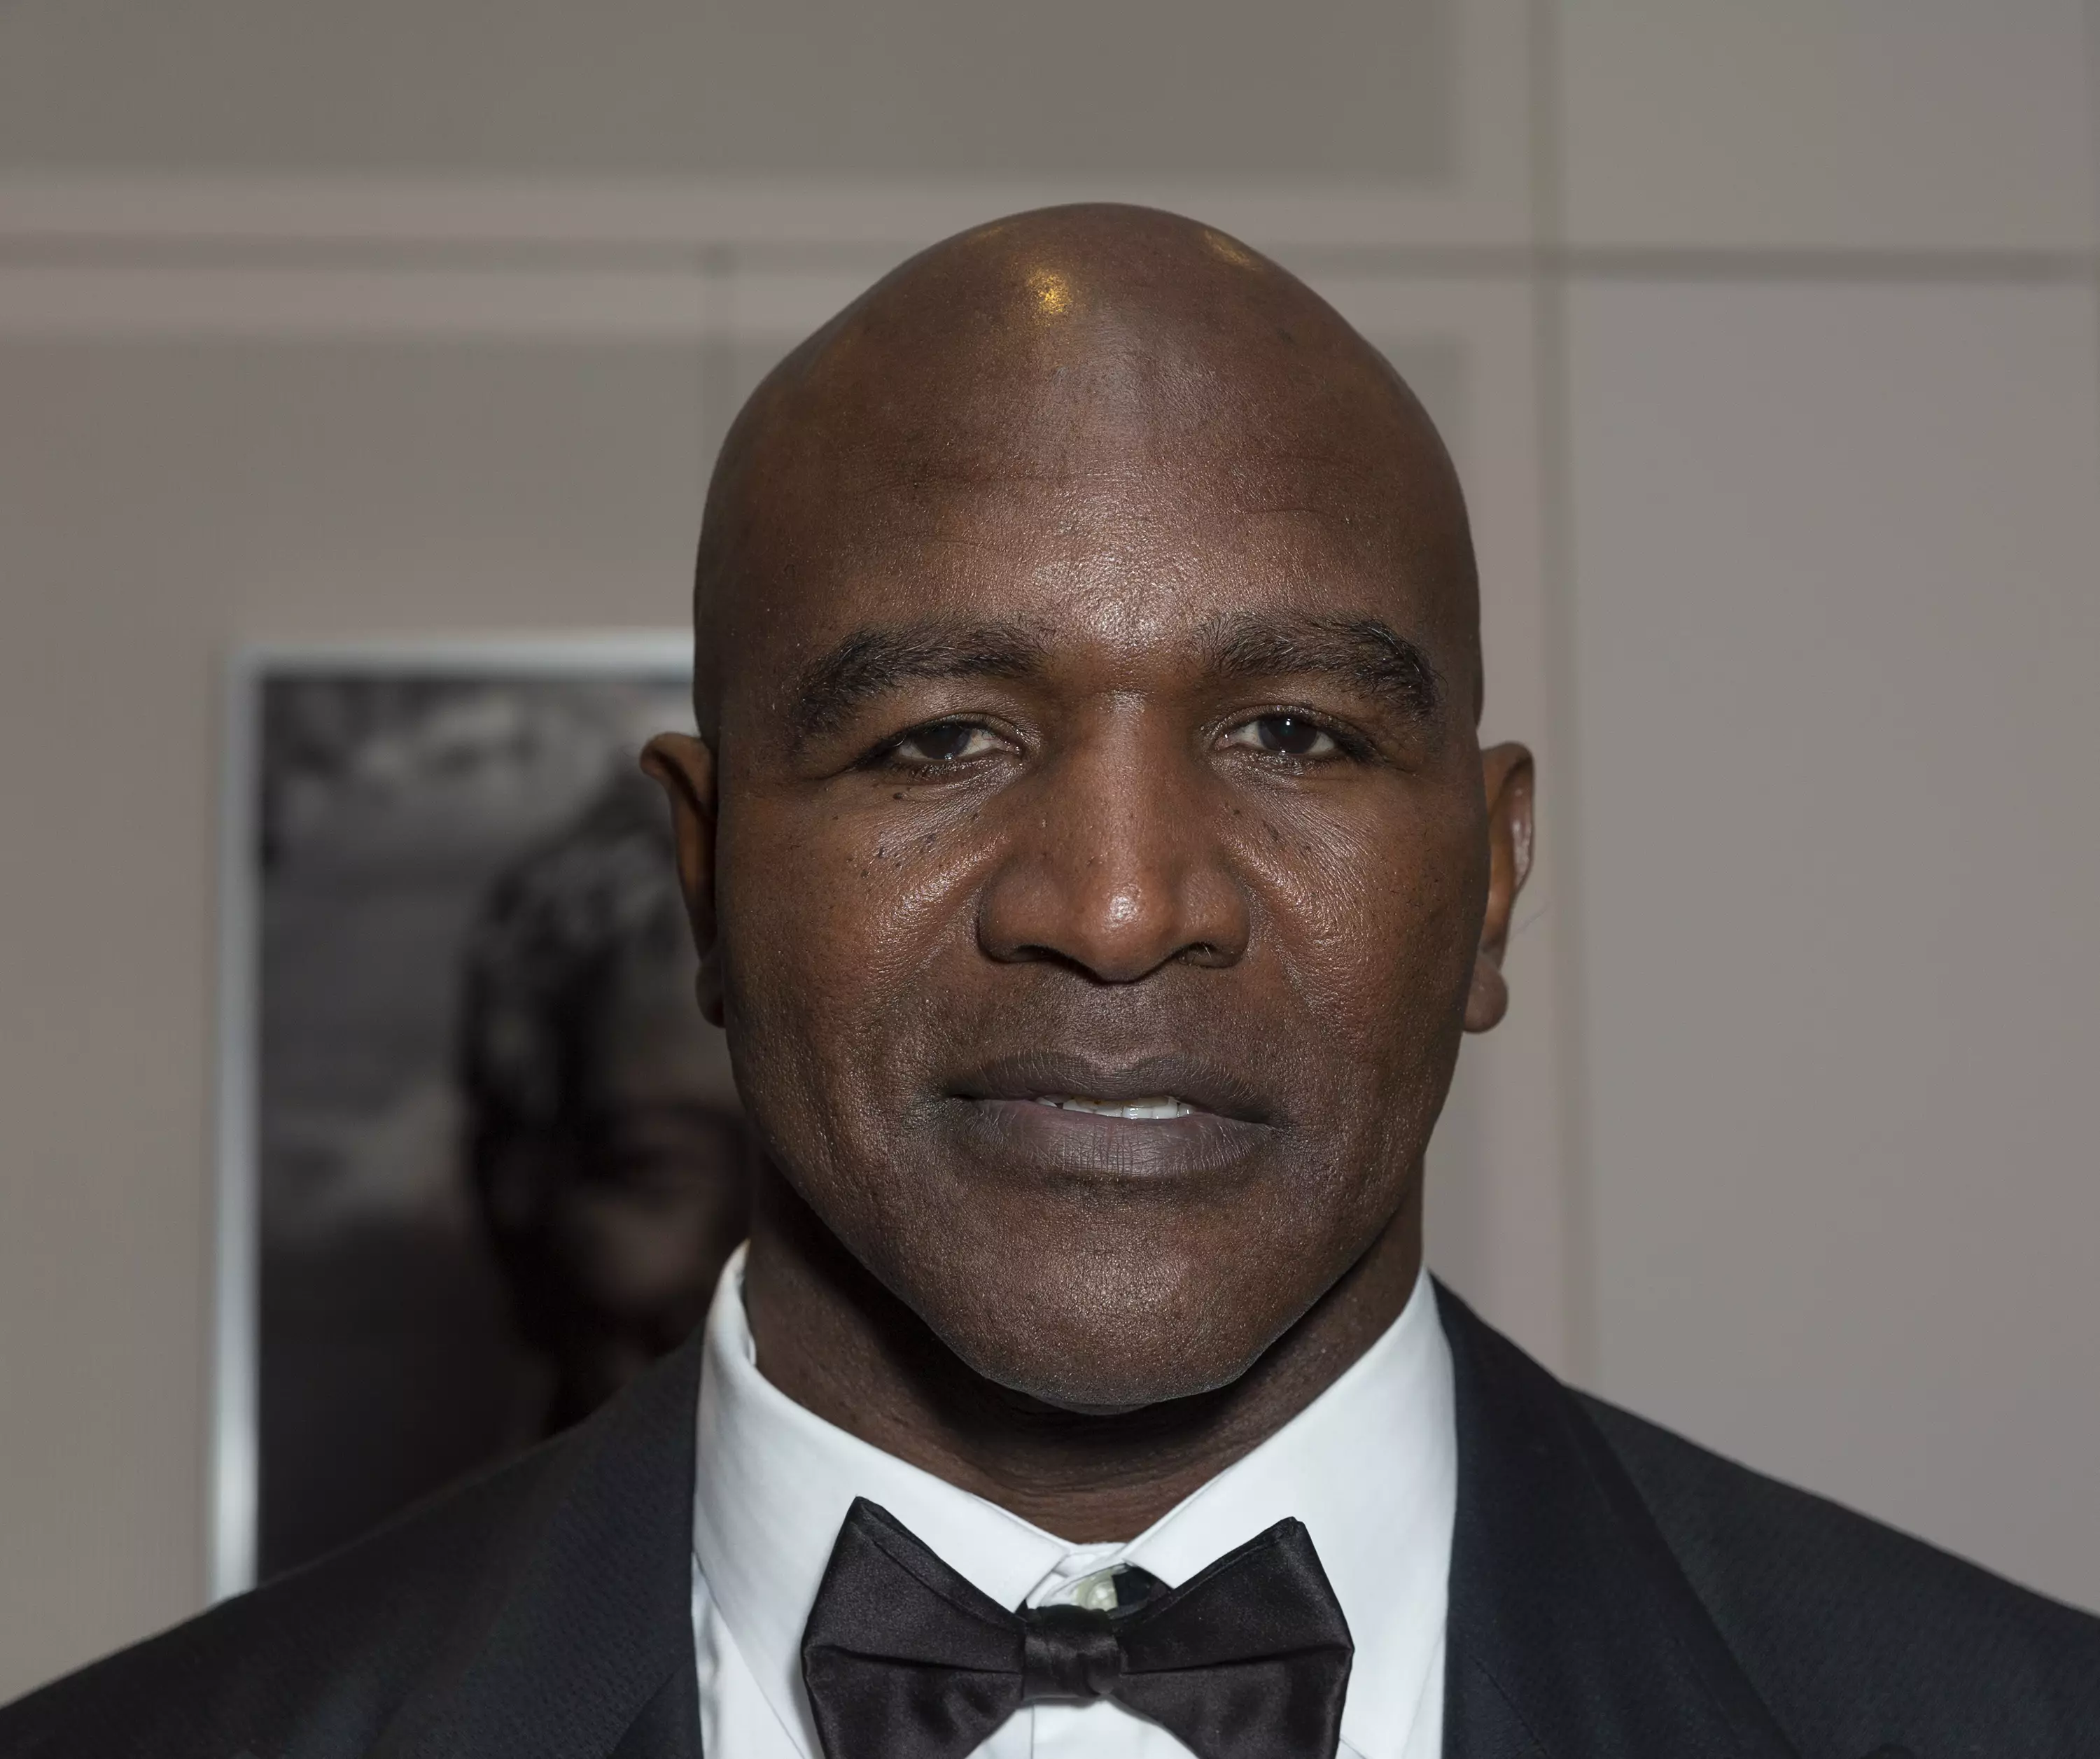 Evander Holyfield retired in 2014, three years after his final fight.